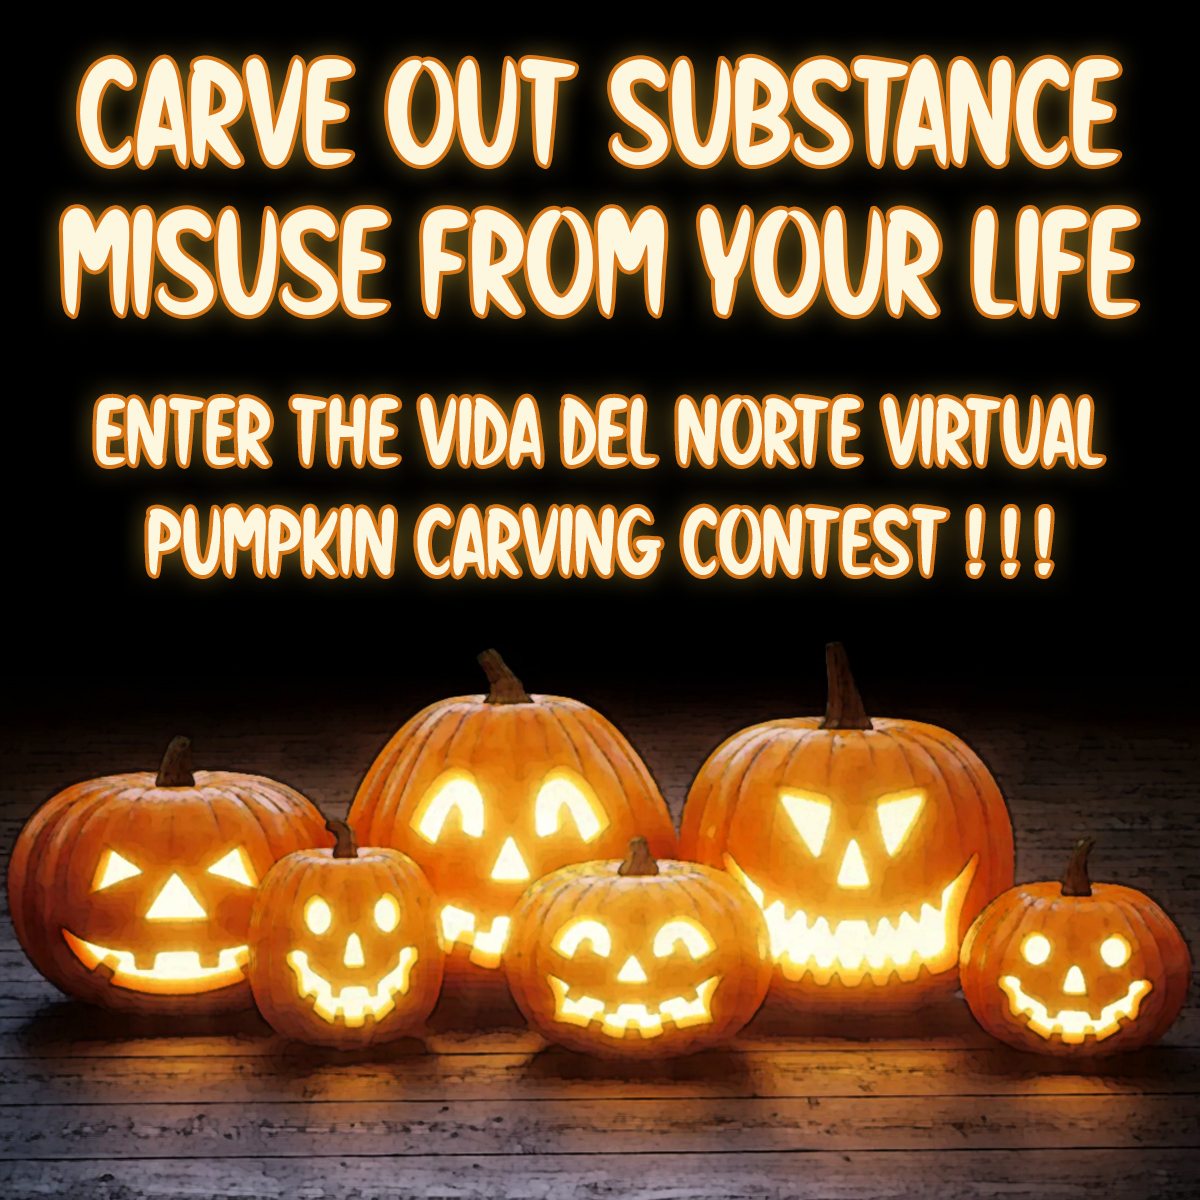 Carve out substance misuse from your life. Enter the Vida Del Norte Virtual Pumpkin Carving Contest